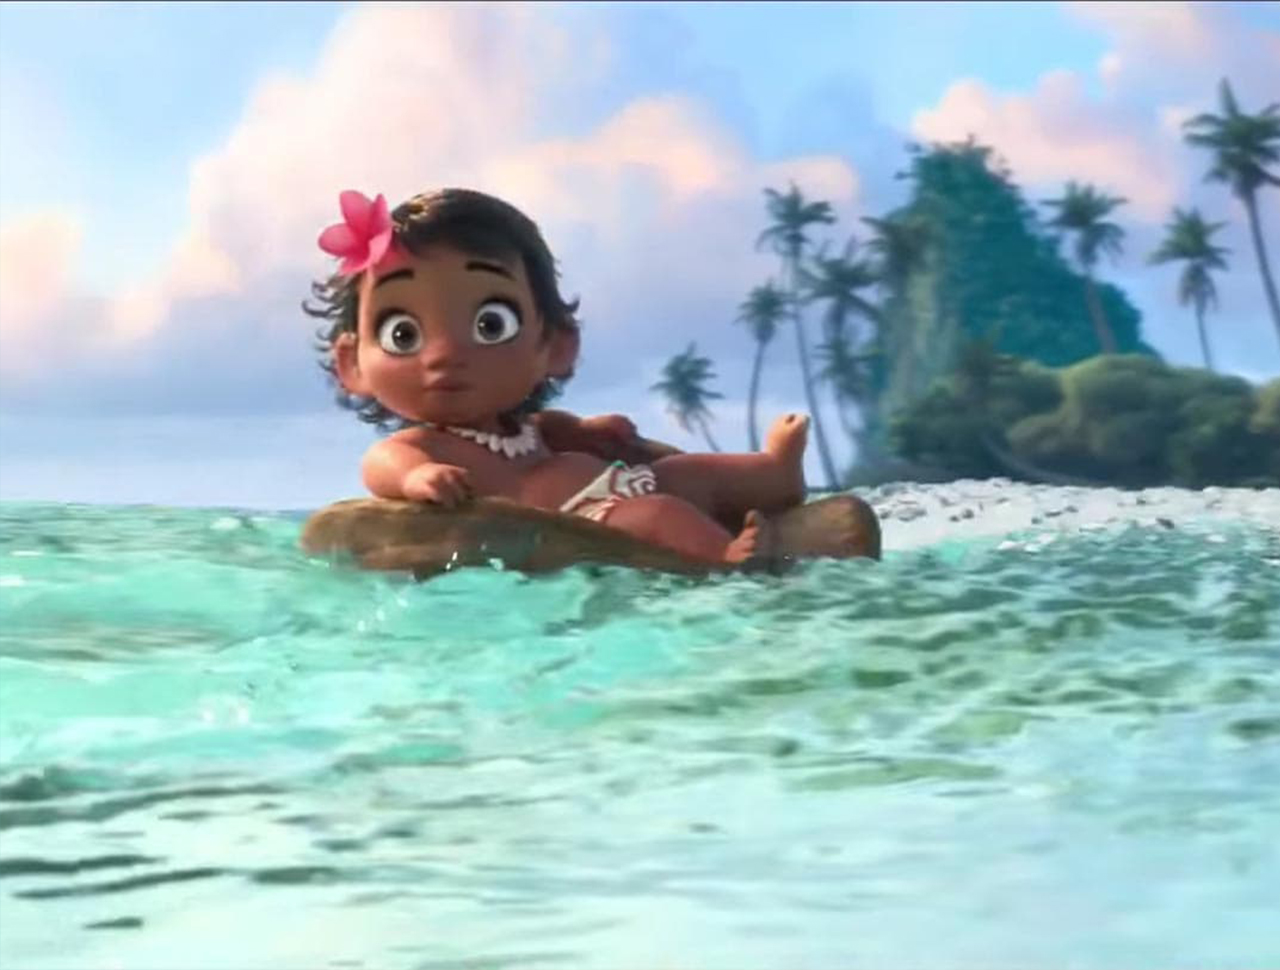 Baby Moana Wallpaper Pictures To Pin On Pinterest Pinsdaddy HD Wallpapers Download Free Images Wallpaper [wallpaper981.blogspot.com]